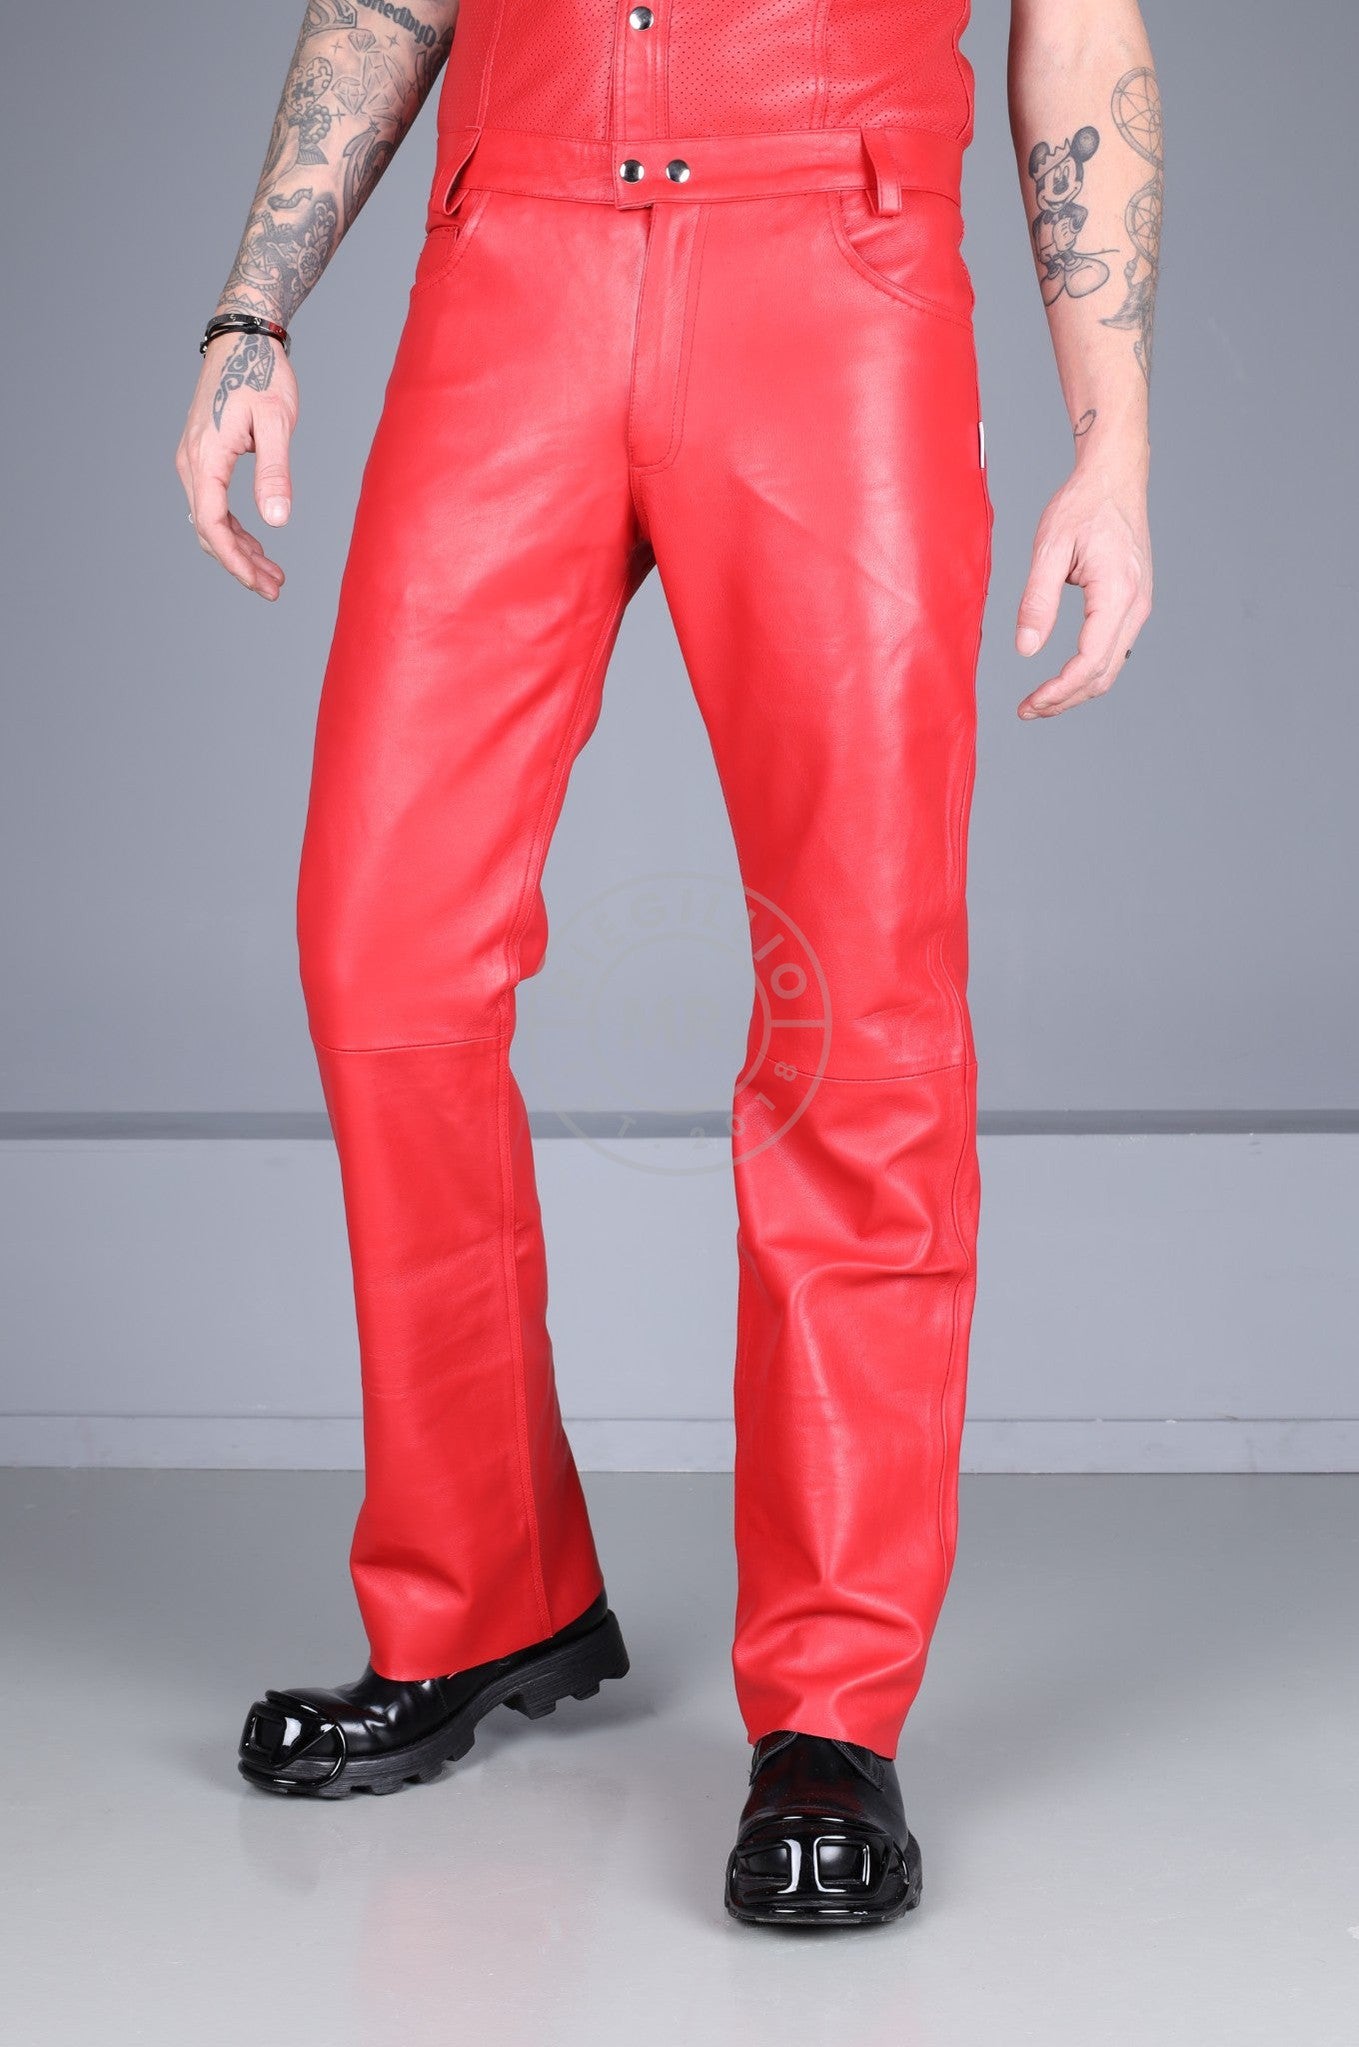 Red Leather Bootcut Pants at MR. Riegillio